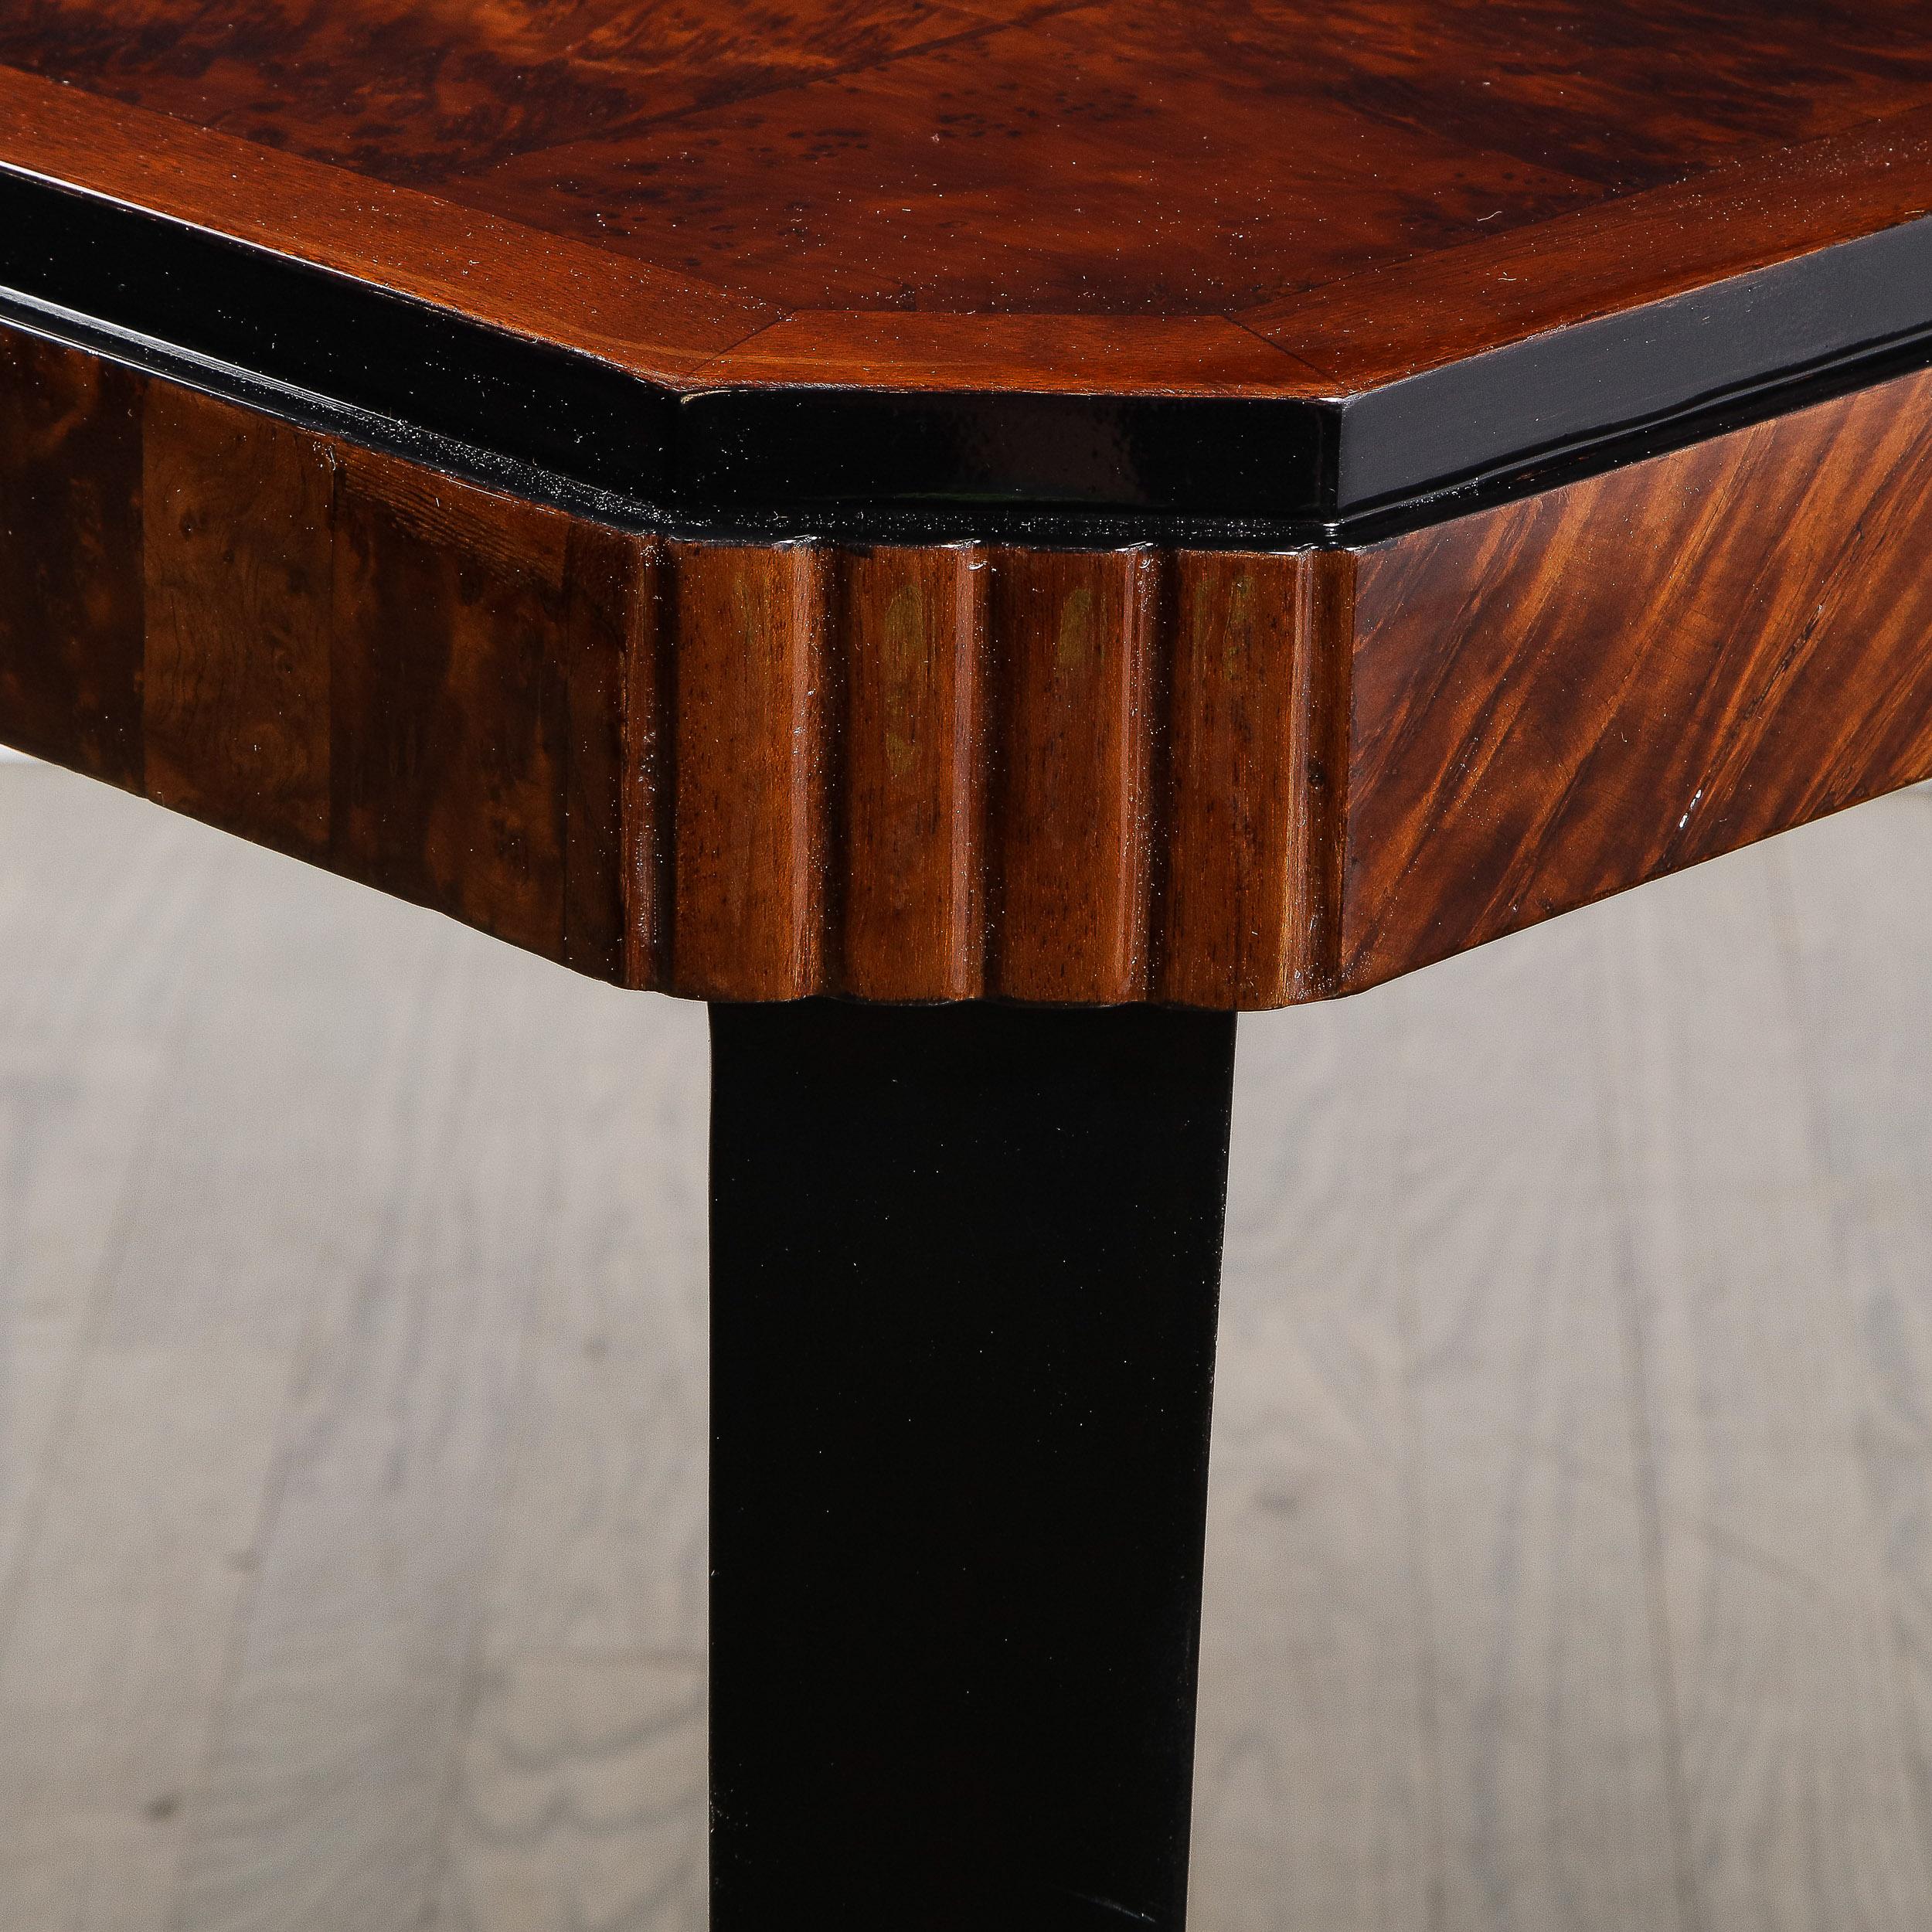 Art Deco Streamlined Cocktail Table in Bookmatched Burled Walnut & Black Lacquer For Sale 1